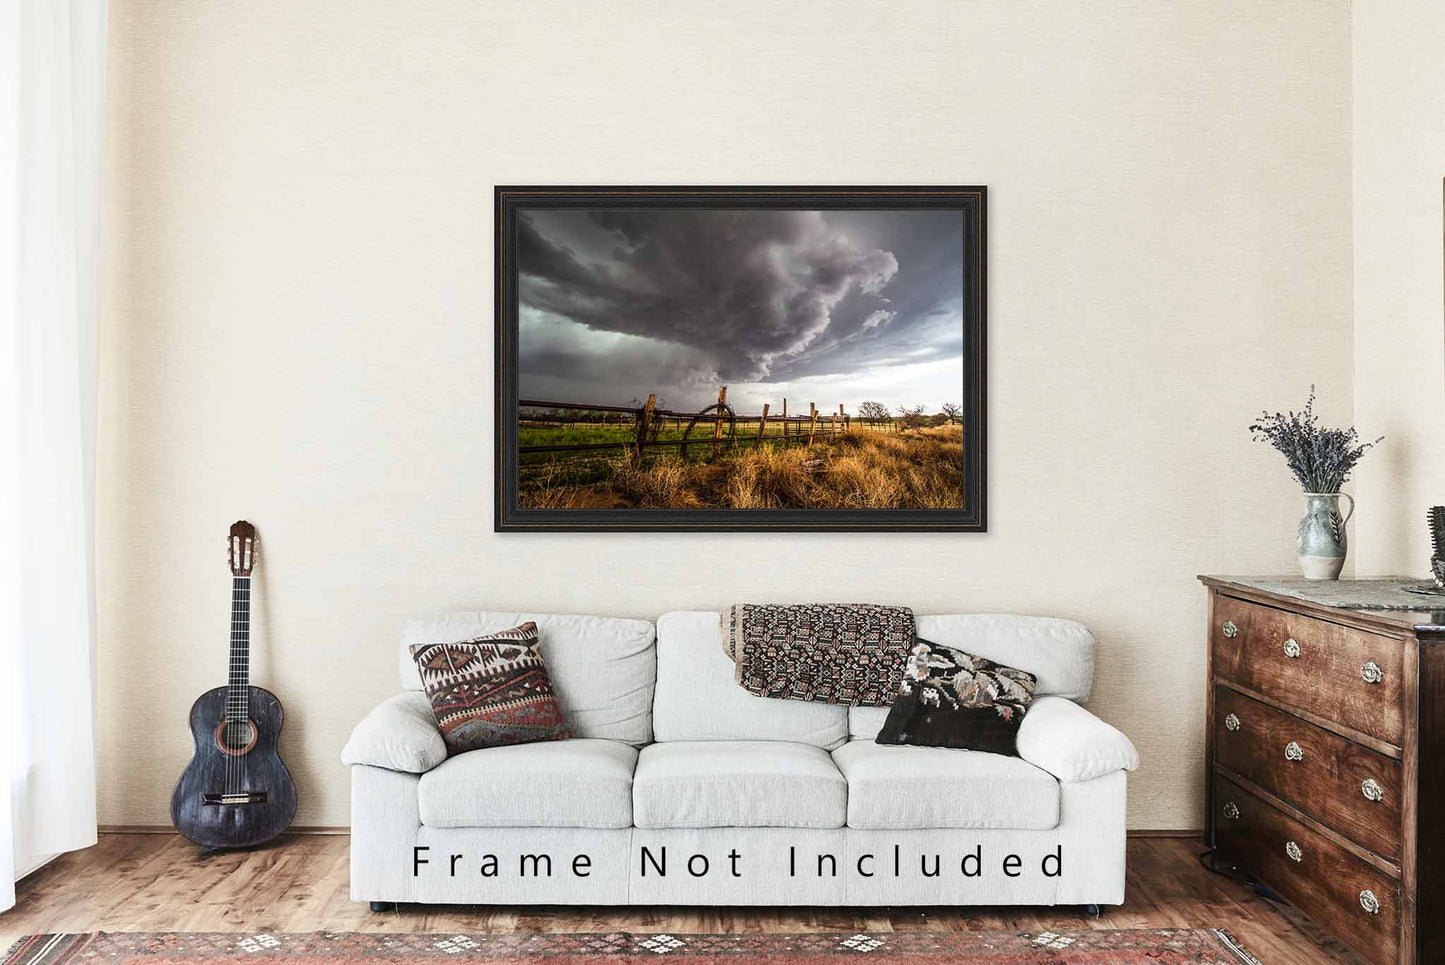 Storm Photography Print (Not Framed) Picture of Thunderstorm Over Barbed Wire Fence on Stormy Day in Oklahoma Farm and Ranch Wall Art Western Decor